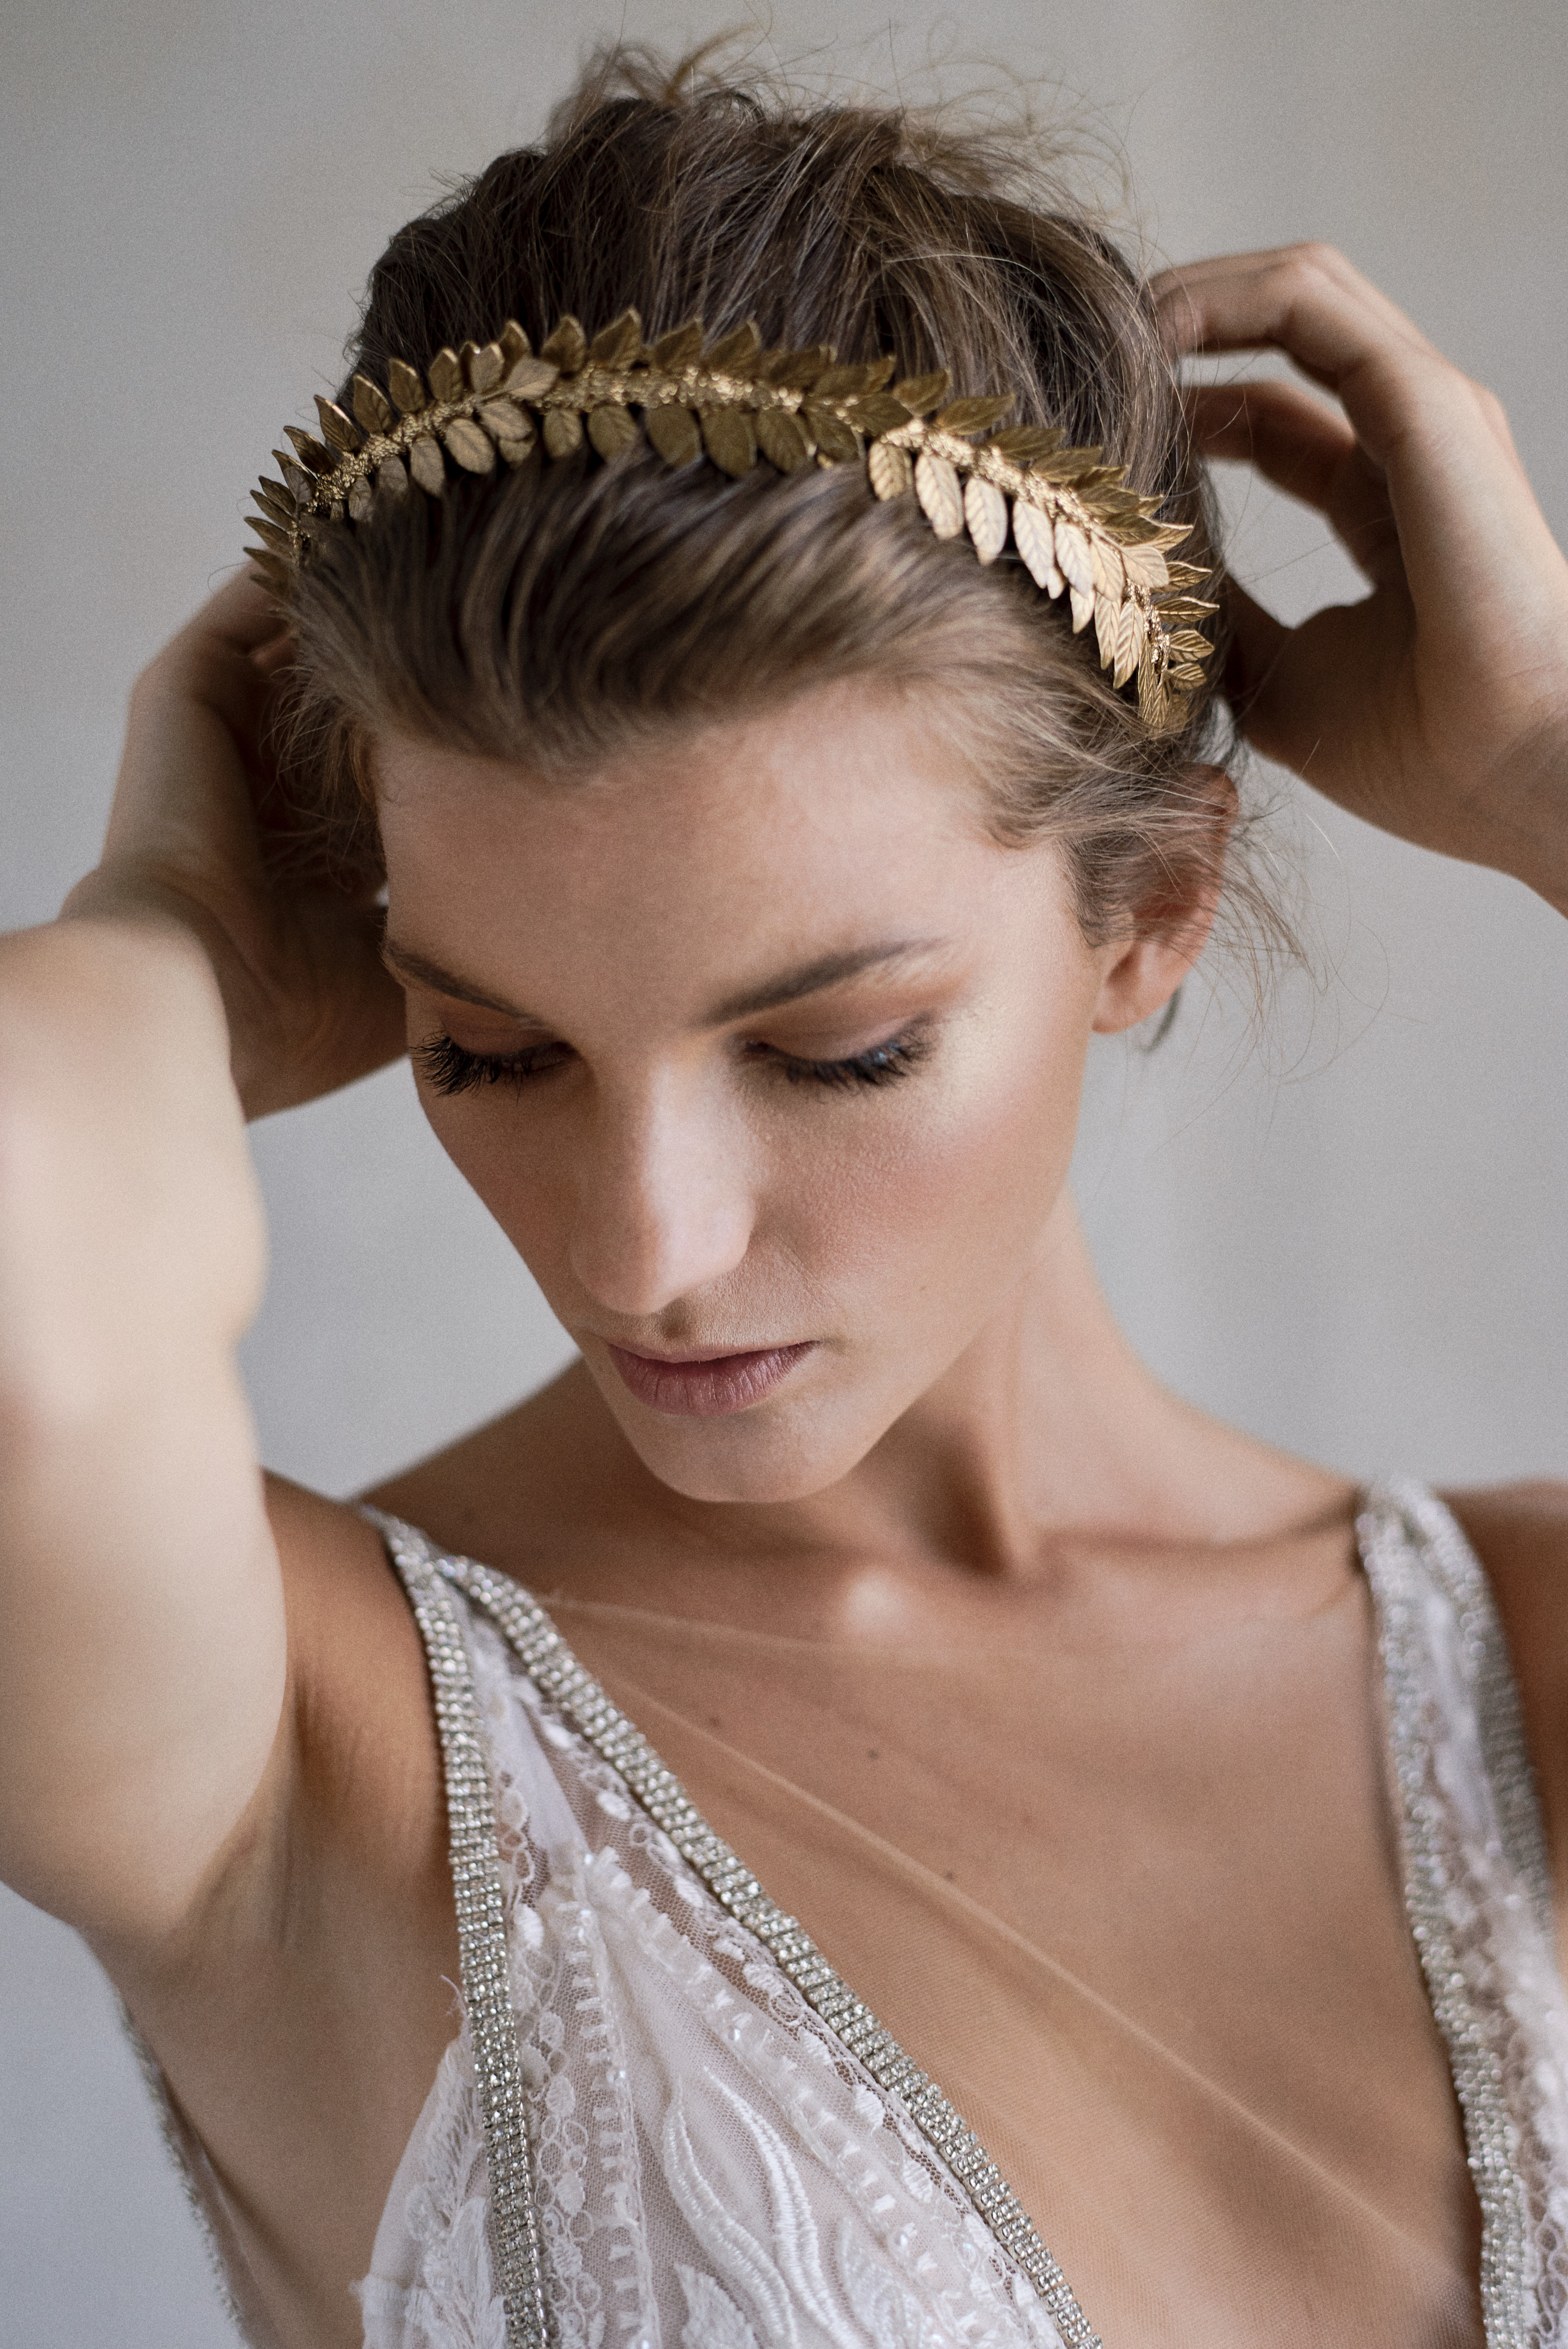 Pre-Wedding Preparation at Windsor Hotel with Uber Chic Bridal Gowns and Regal Accessories